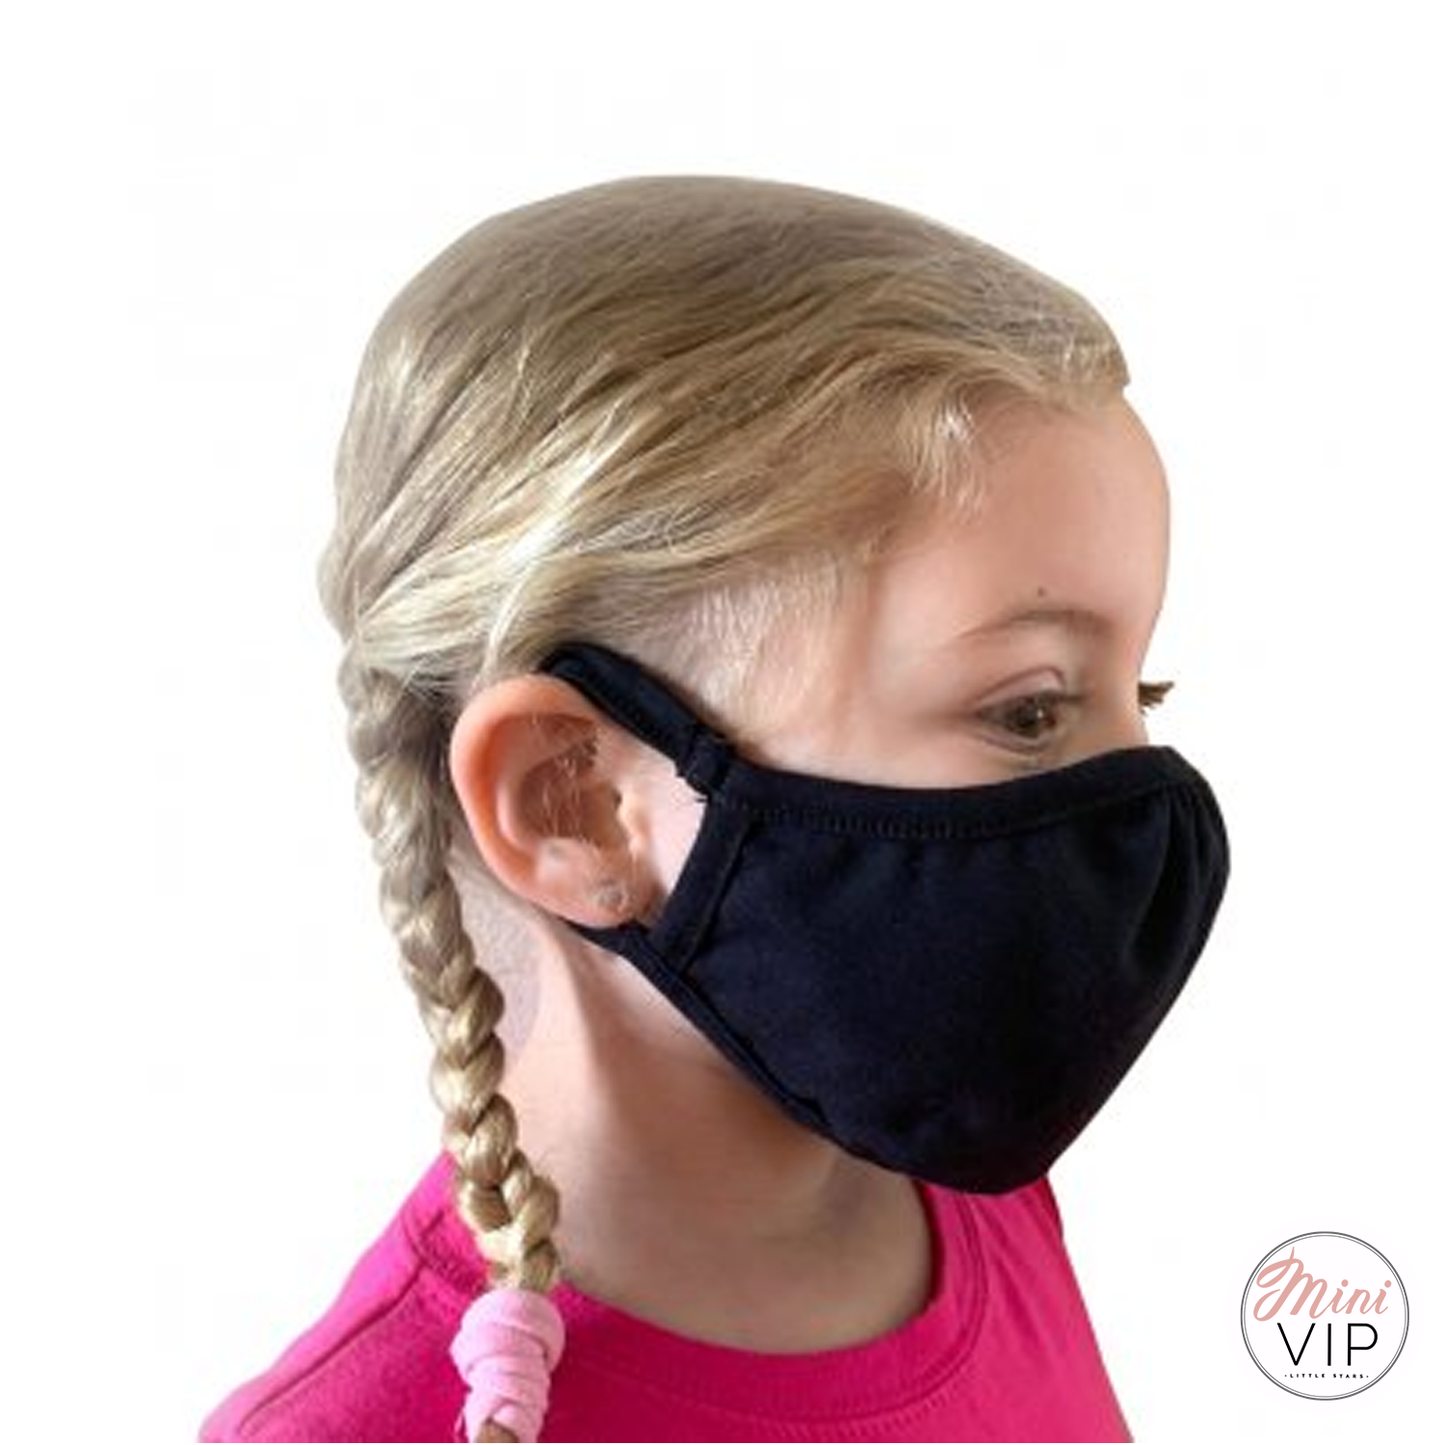 Personalised Block Initials Face Mask / Covering - kids & adult sizes